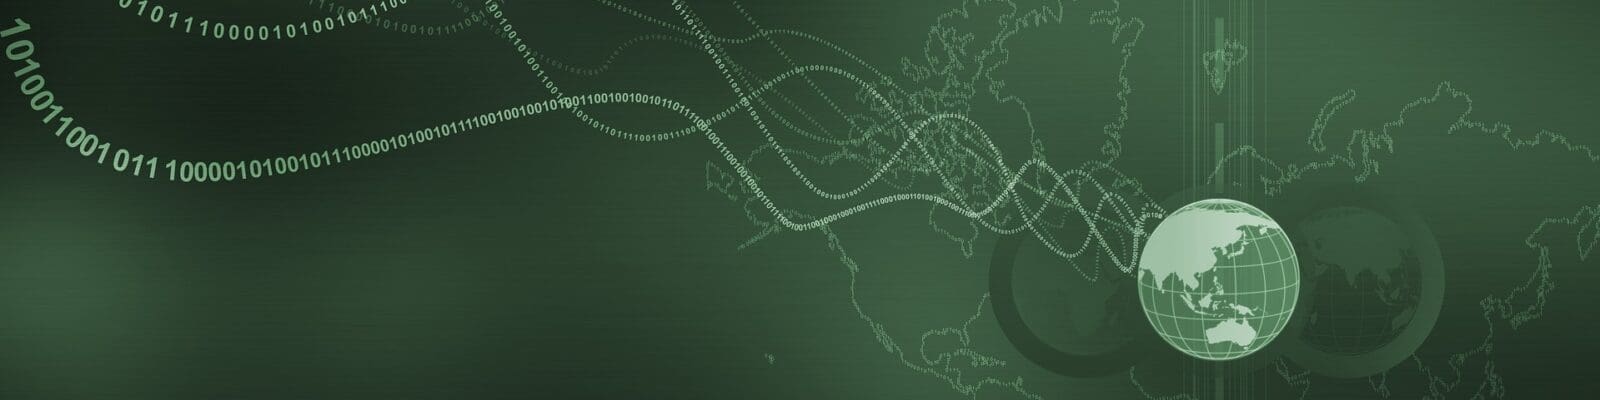 Green background with image of a globe. wavy streams of binary code are flowing out of the globe symbolising communicating through the internet.